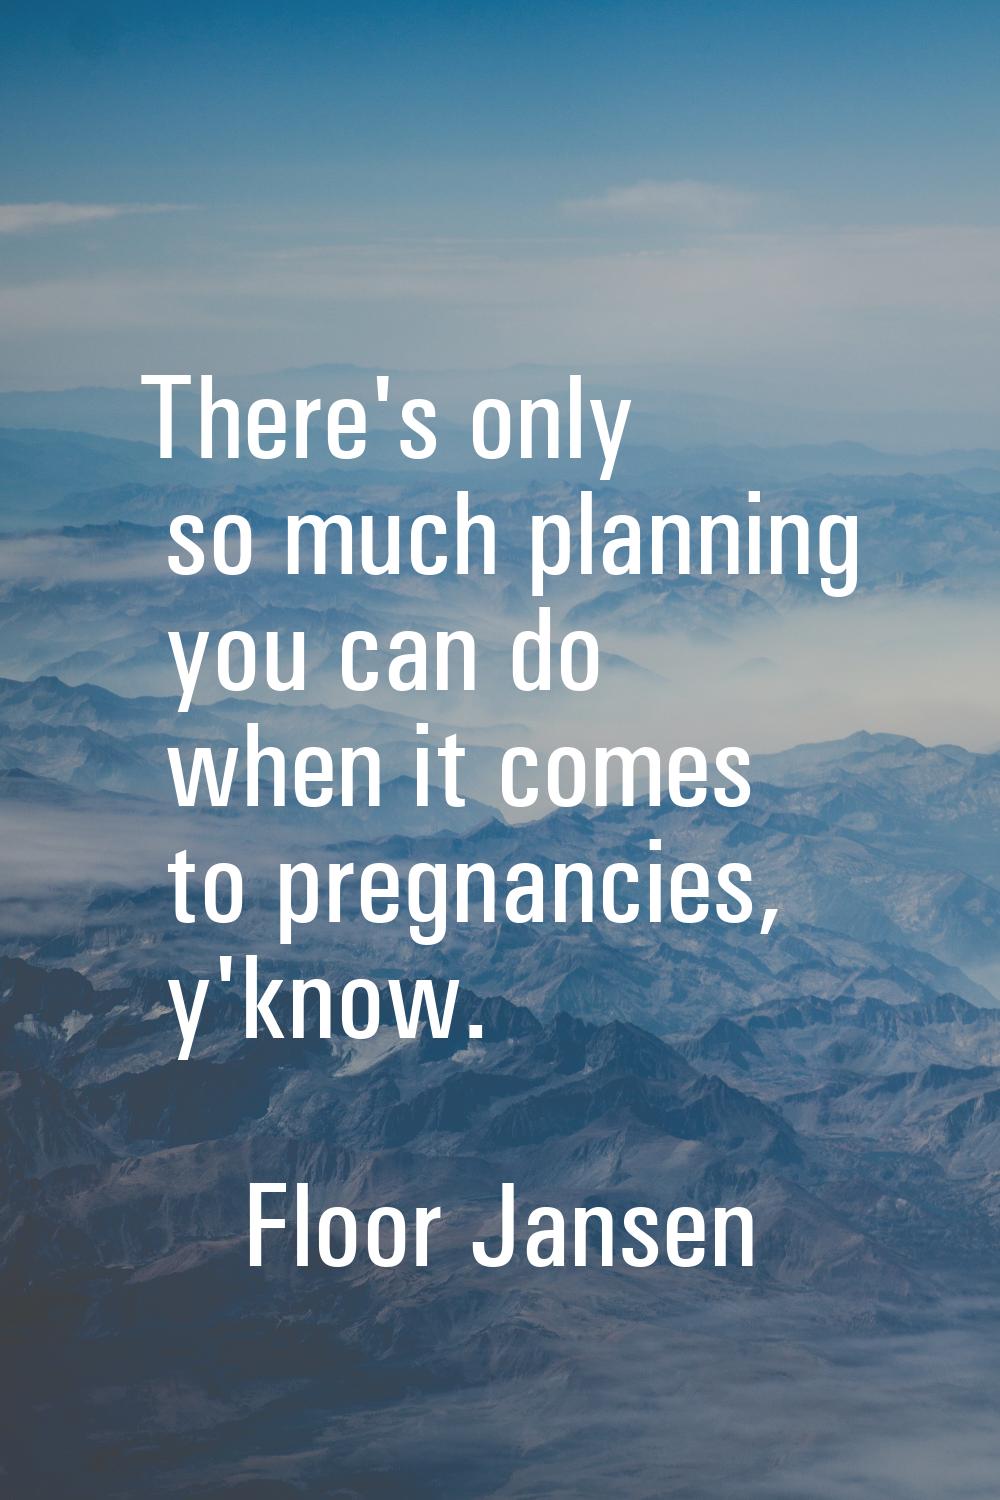 There's only so much planning you can do when it comes to pregnancies, y'know.